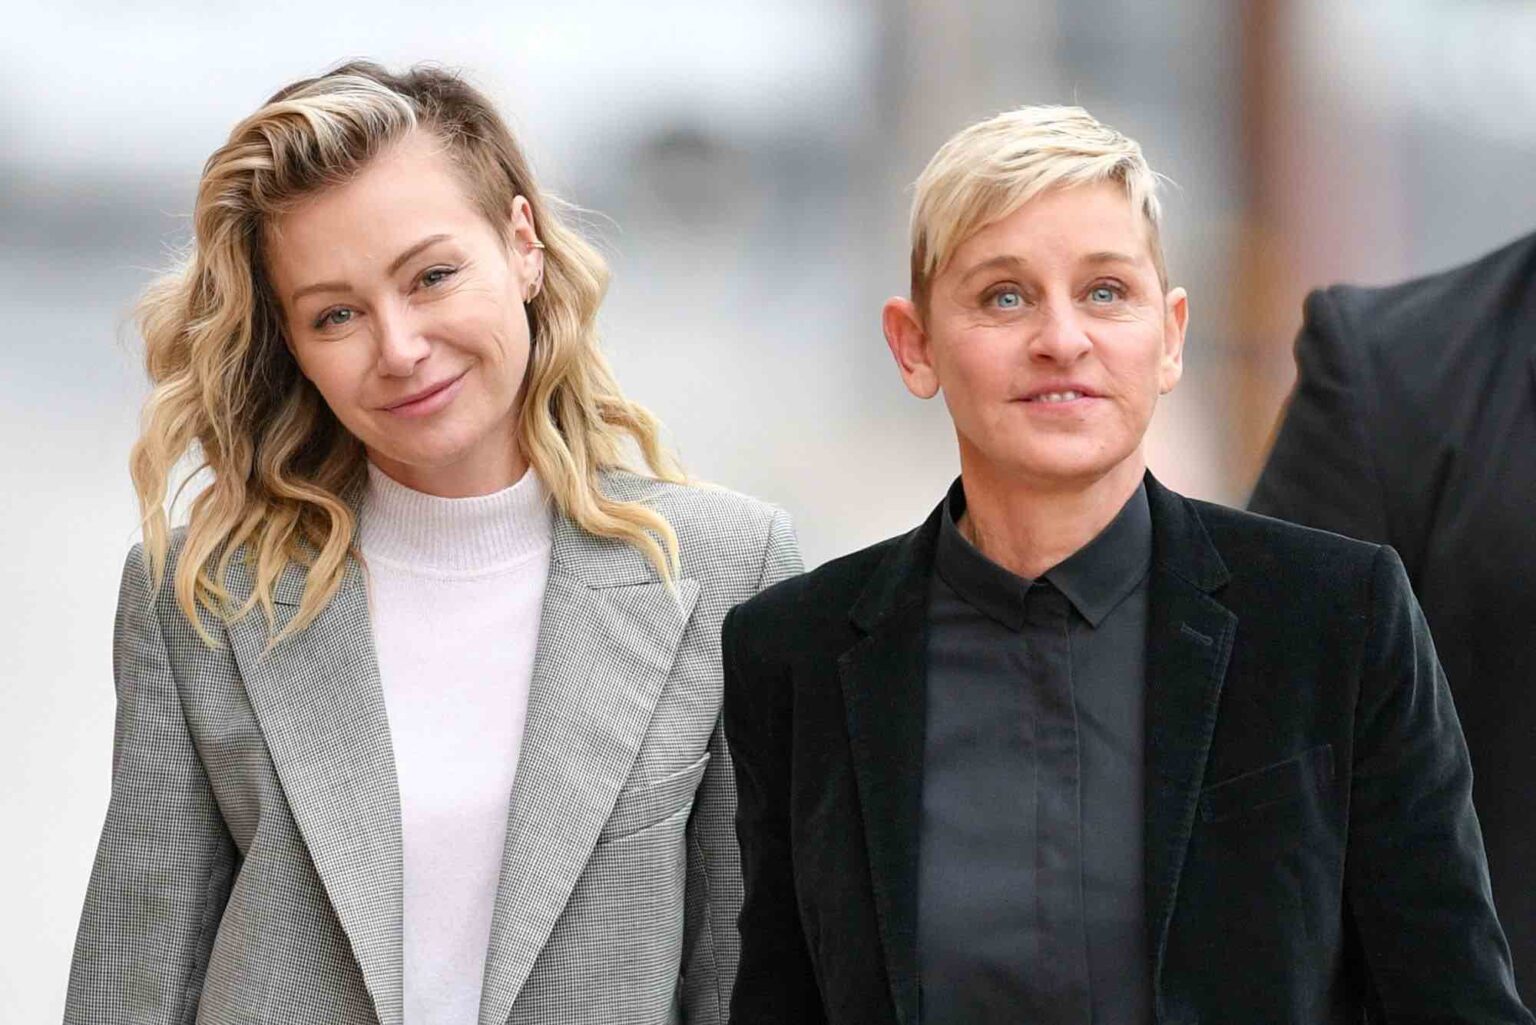 The couple with the most rumors swirling around them are Ellen DeGeneres and Portia de Rossi. Can they save their marriage? Here's what we know.